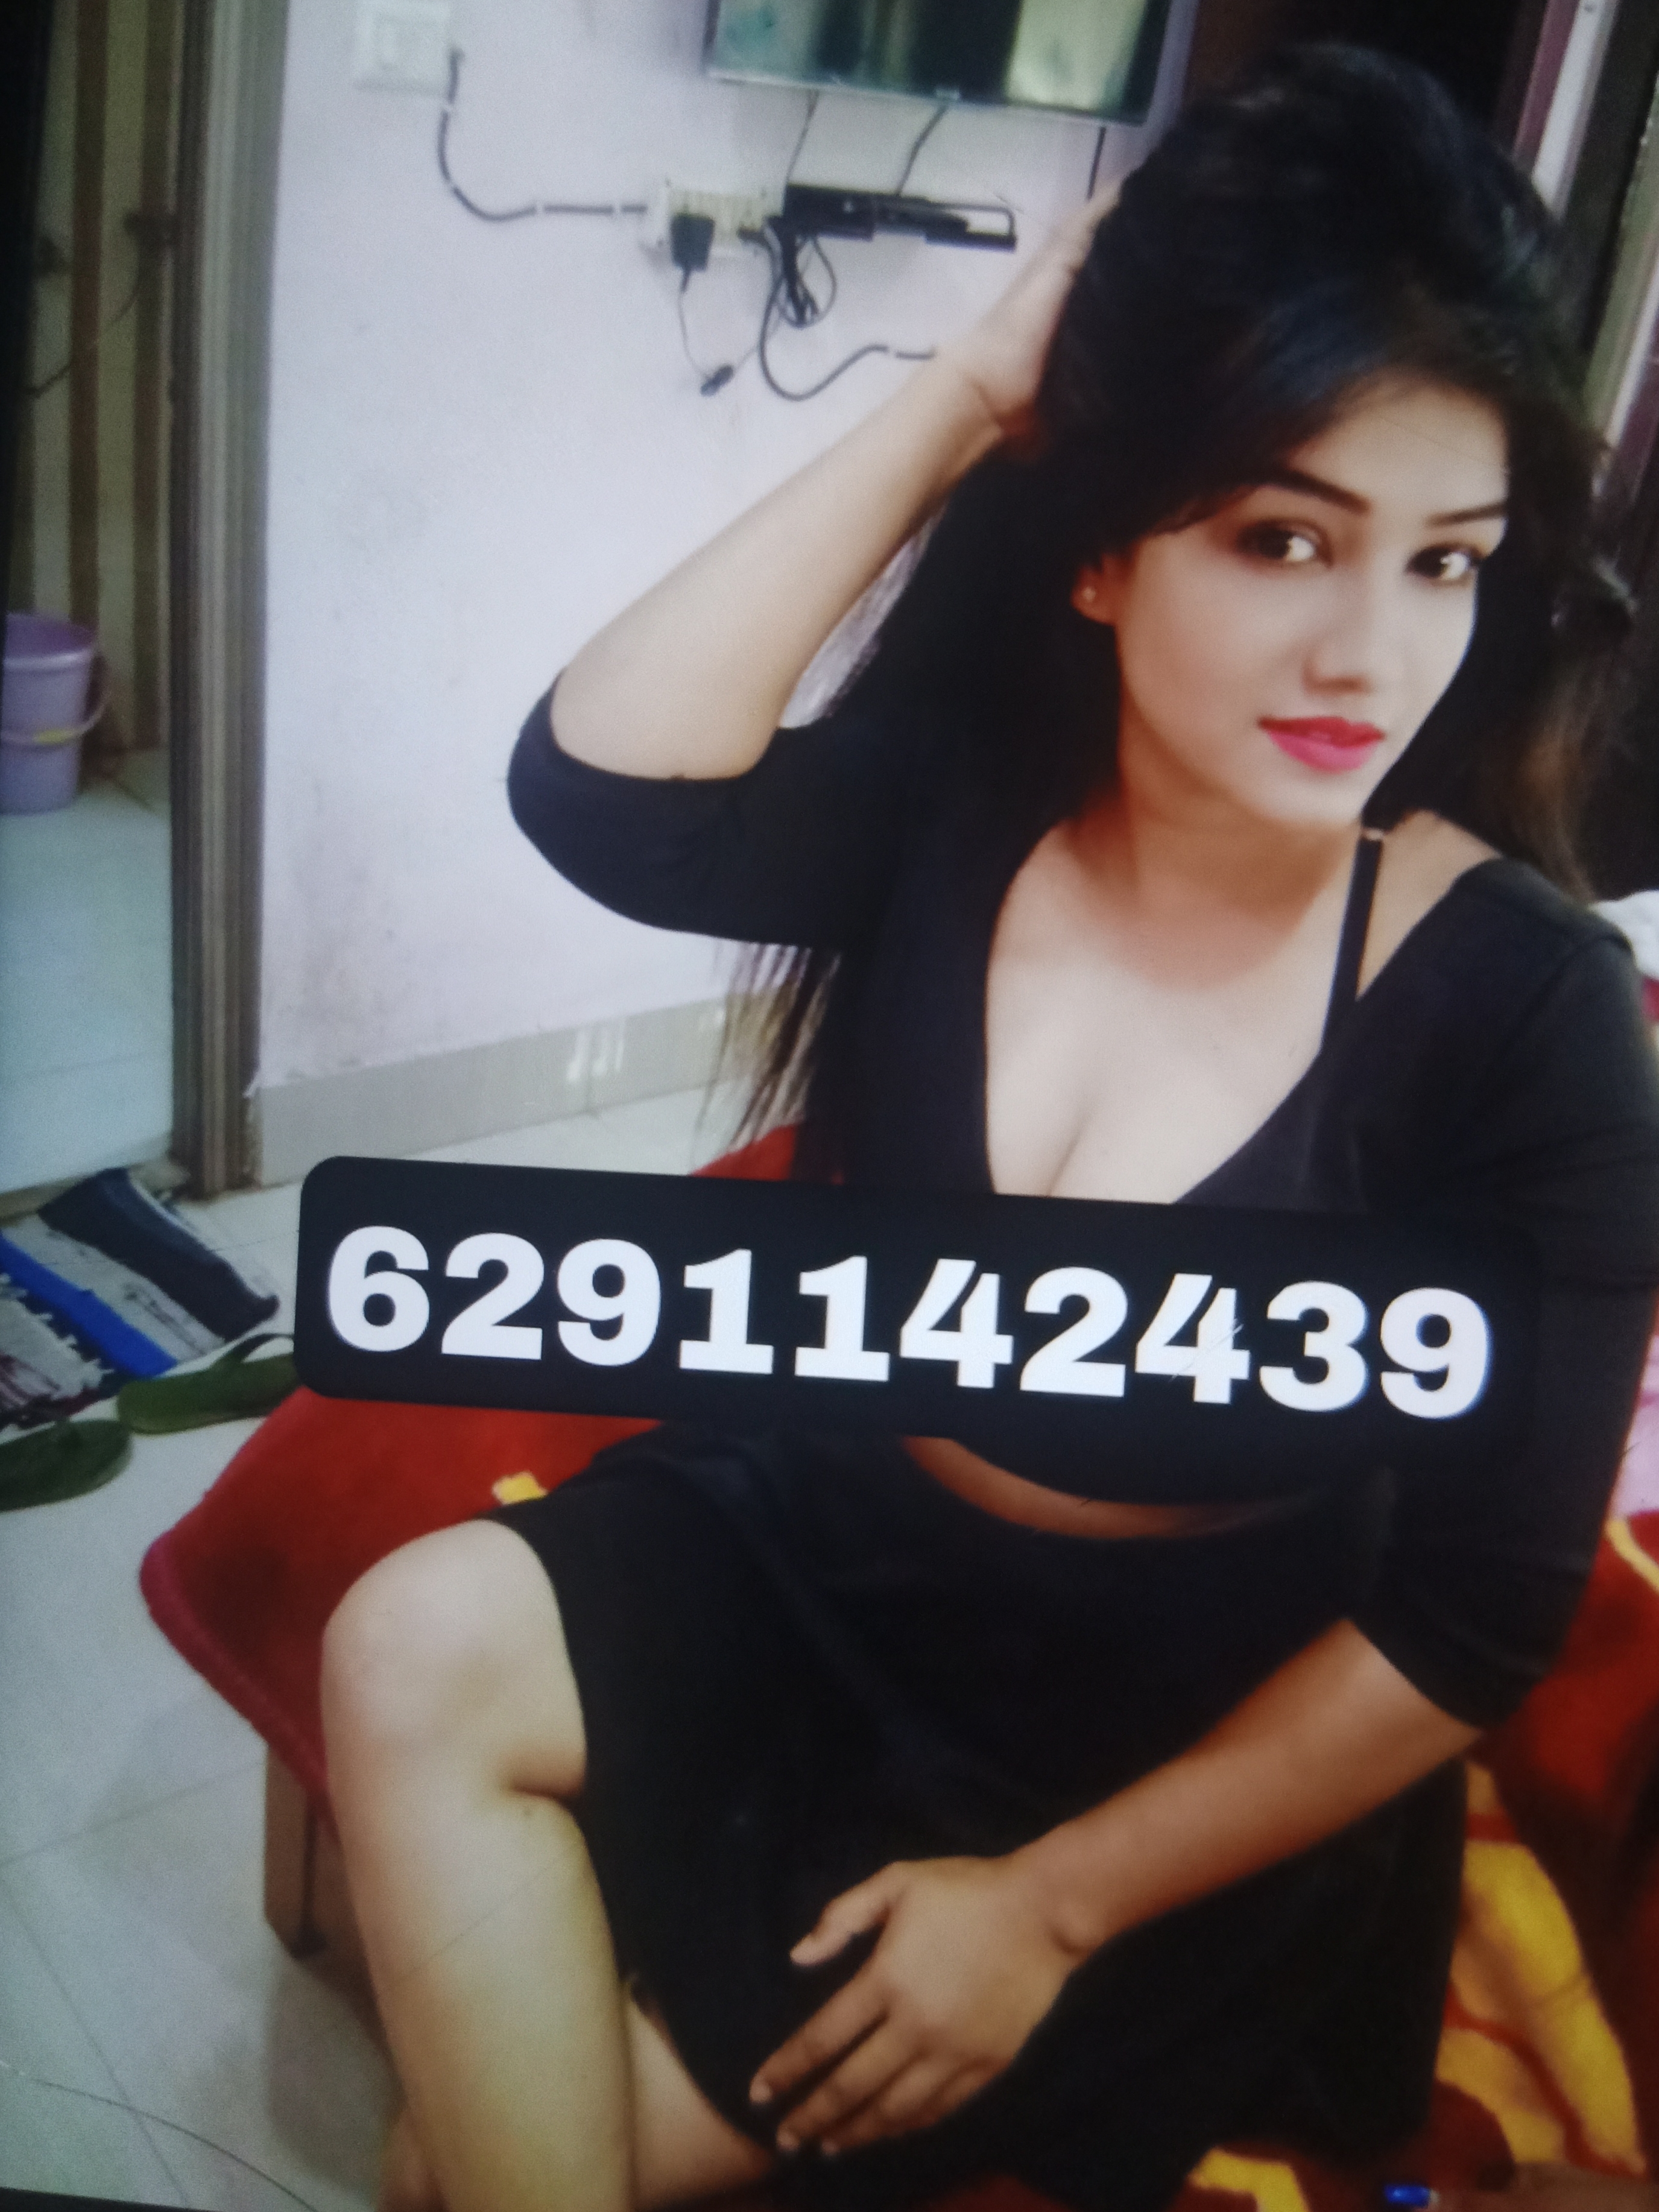 Kompally hoga best service are available now genuine person 